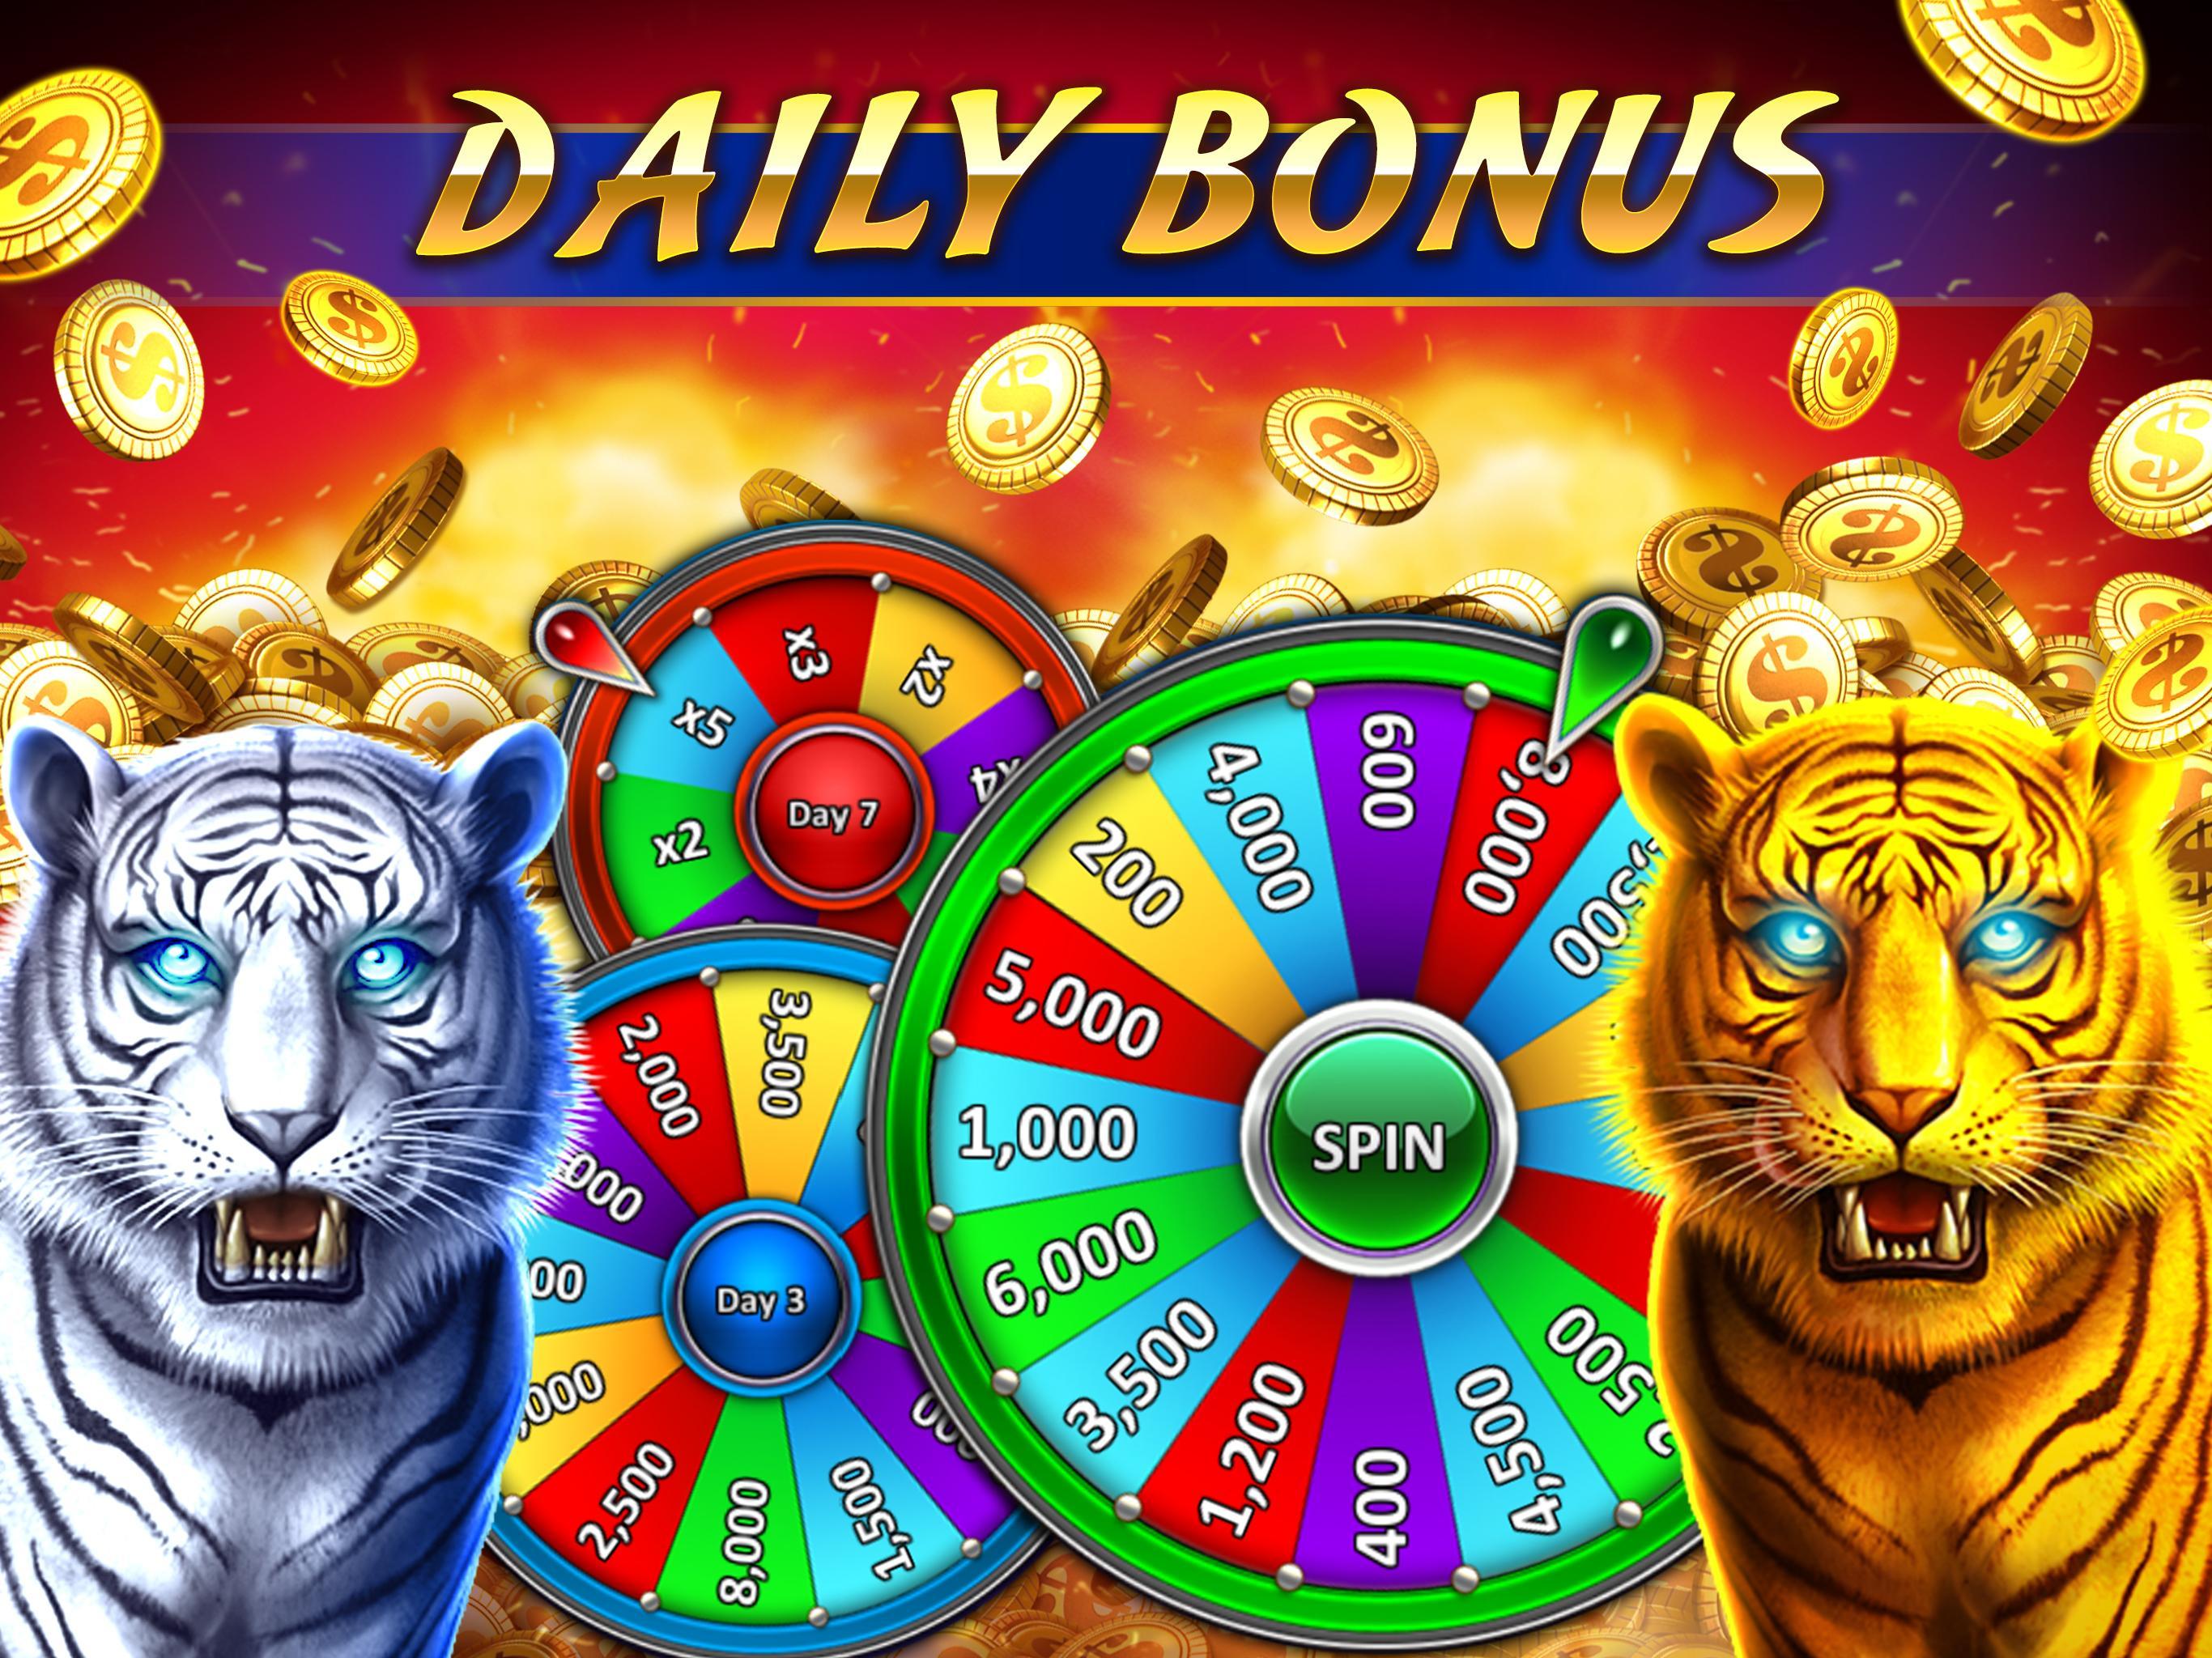 Golden Tiger Slots - Online Casino Game for Android - APK Download